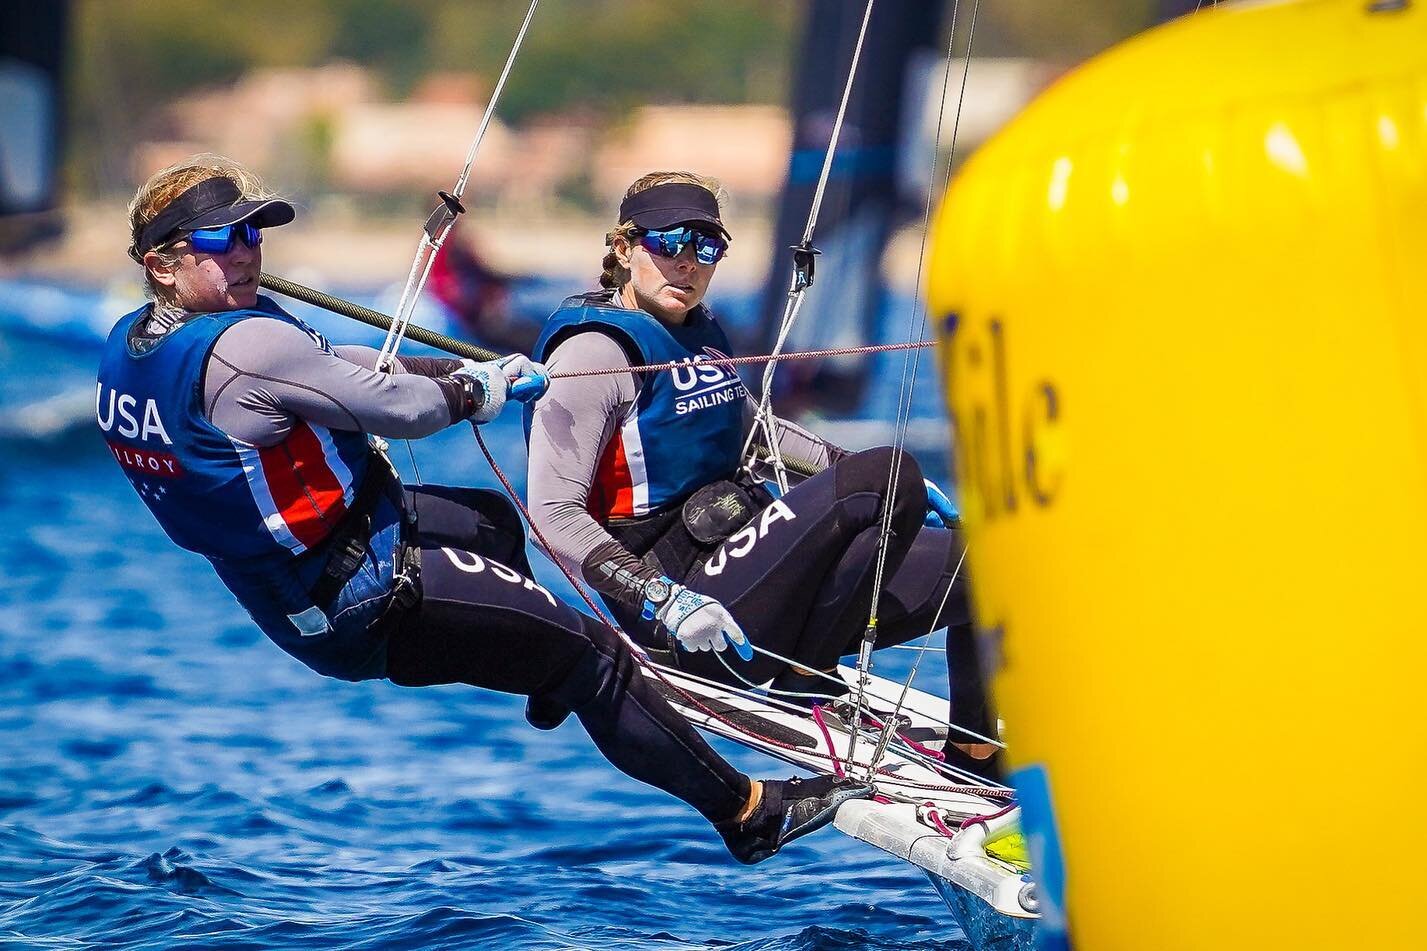 We finished Hyeres Olympic Week in 8th place overall, and qualified for the Olympic Test Event and Pan Am Games! After our 5th place in Palma, we could lock down the qualifying spots by making the top-ten medal race cut, so we focused on executing a 